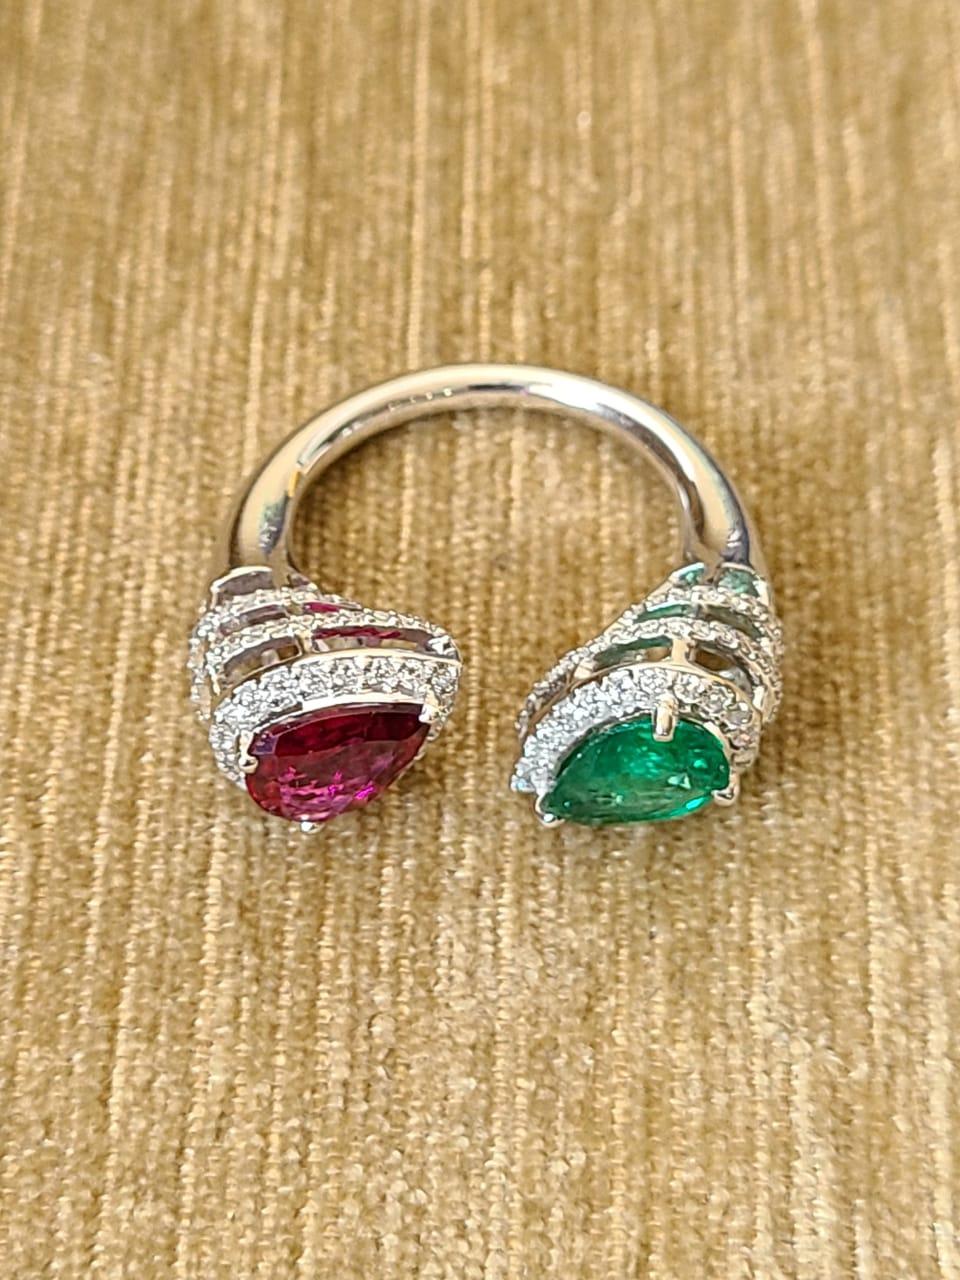 A very gorgeous and wearable Emerald and Rubilite Cocktail Ring set in 18K Gold & Diamonds. The weight of the Emerald is 1.12 carats. The Emerald is completely natural, without any treatment and is of Zambian origin. The weight of the Rubilite is